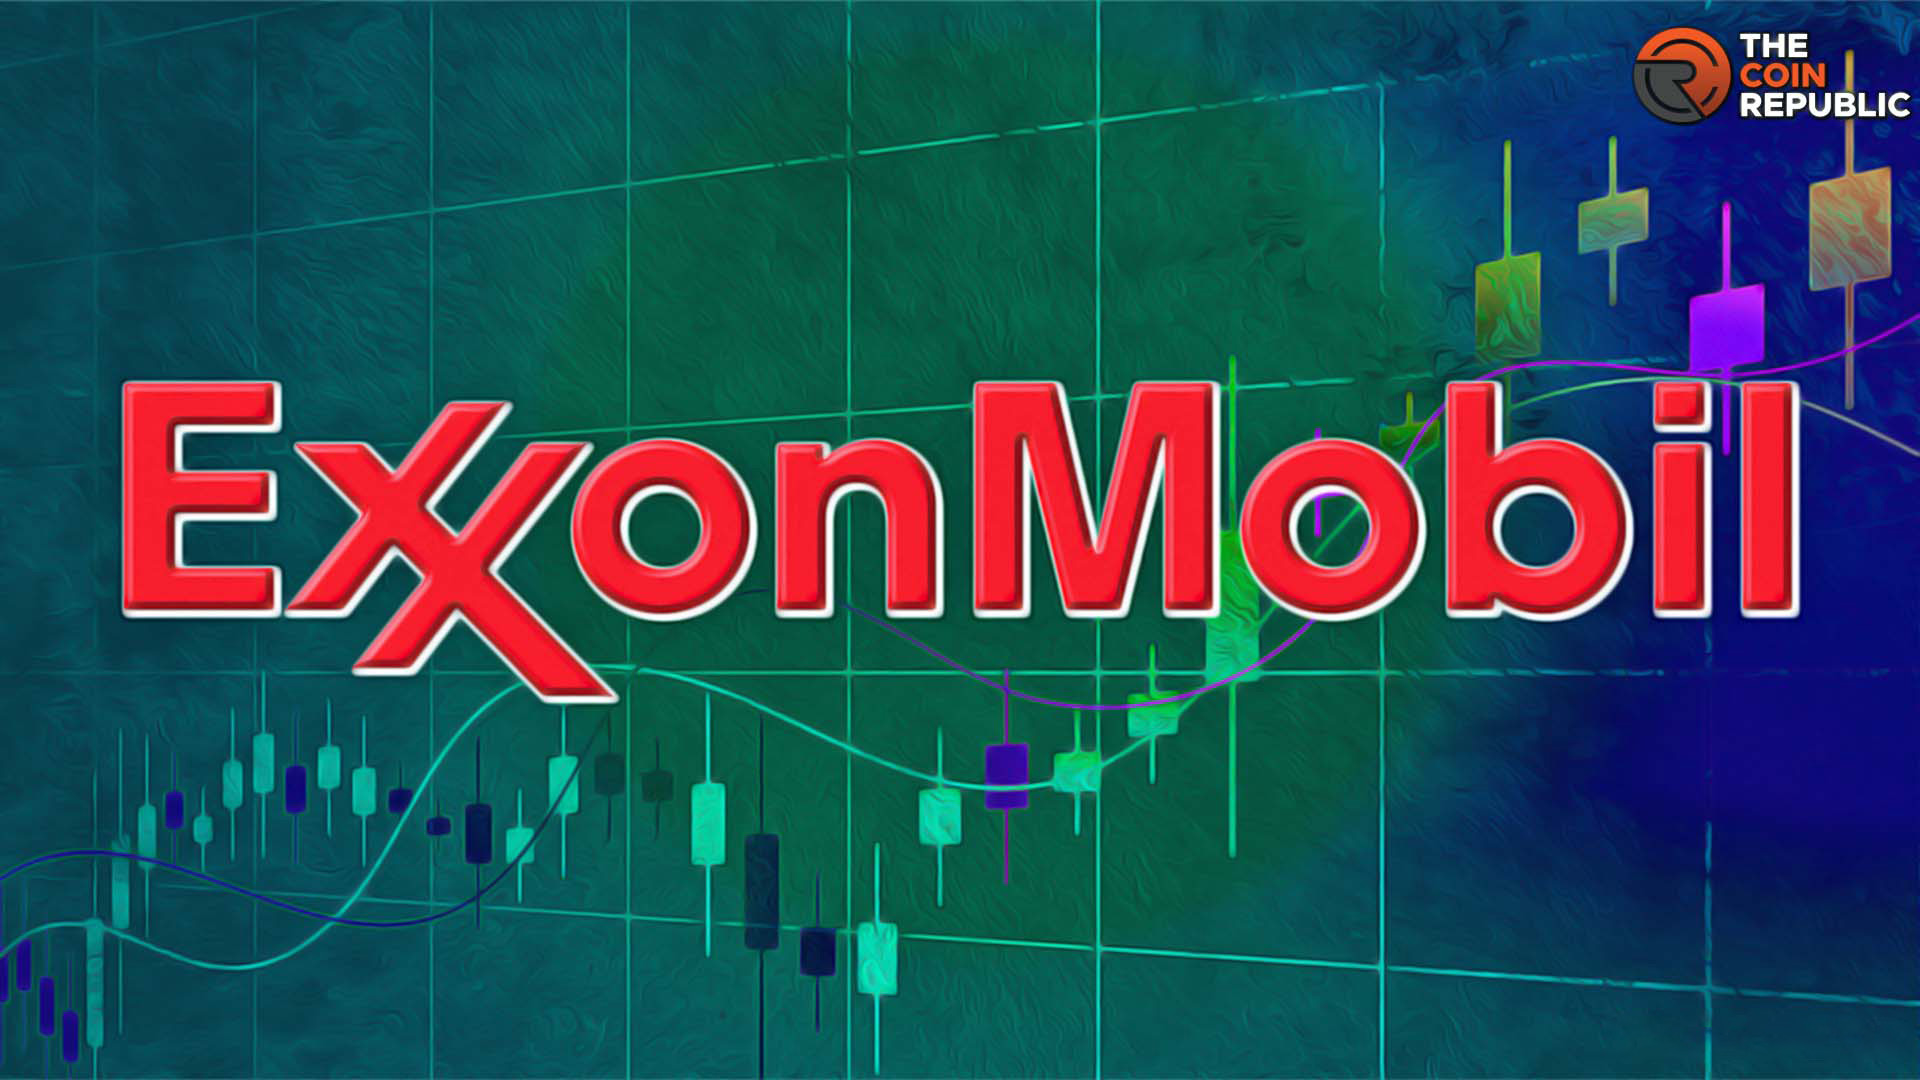 XOM Stock: -2.57% Intraday; Sellers Dominate, Reversal Possible?